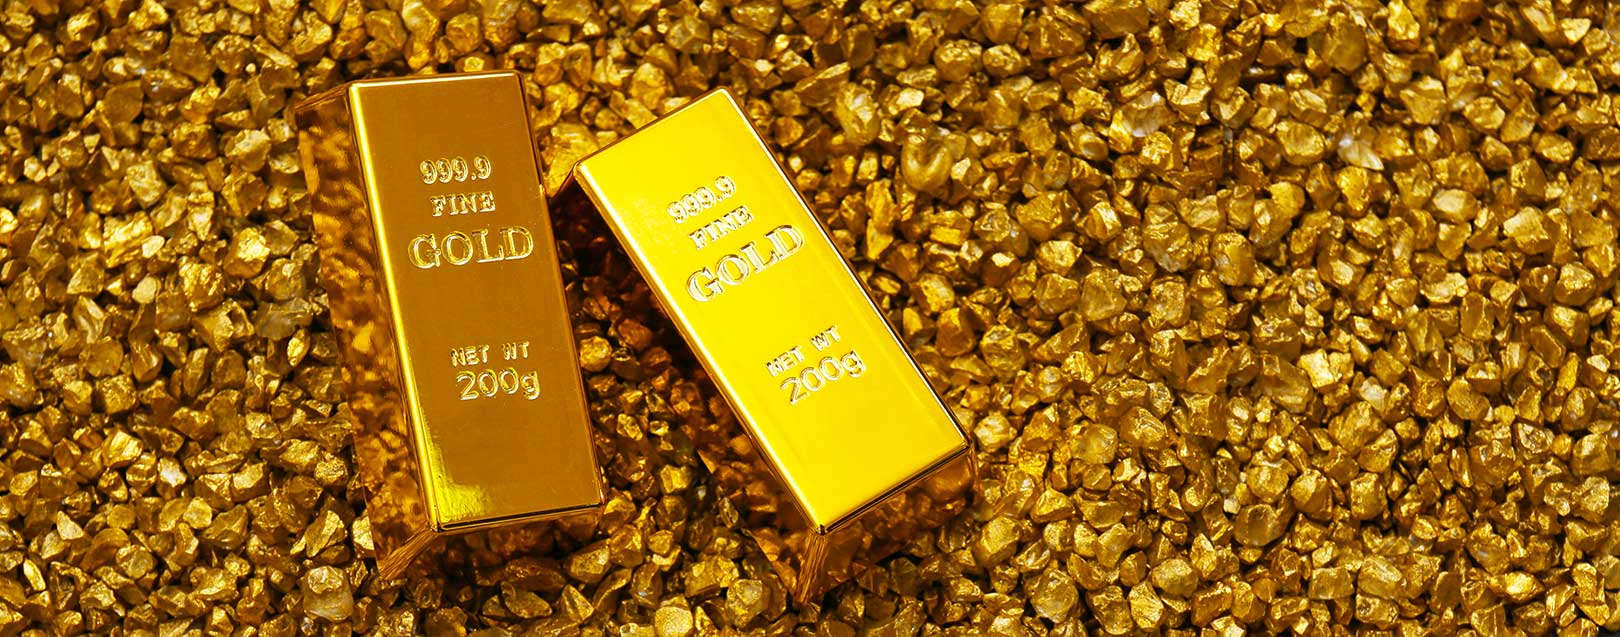 Gold bonds trading to start this month-end: Govt